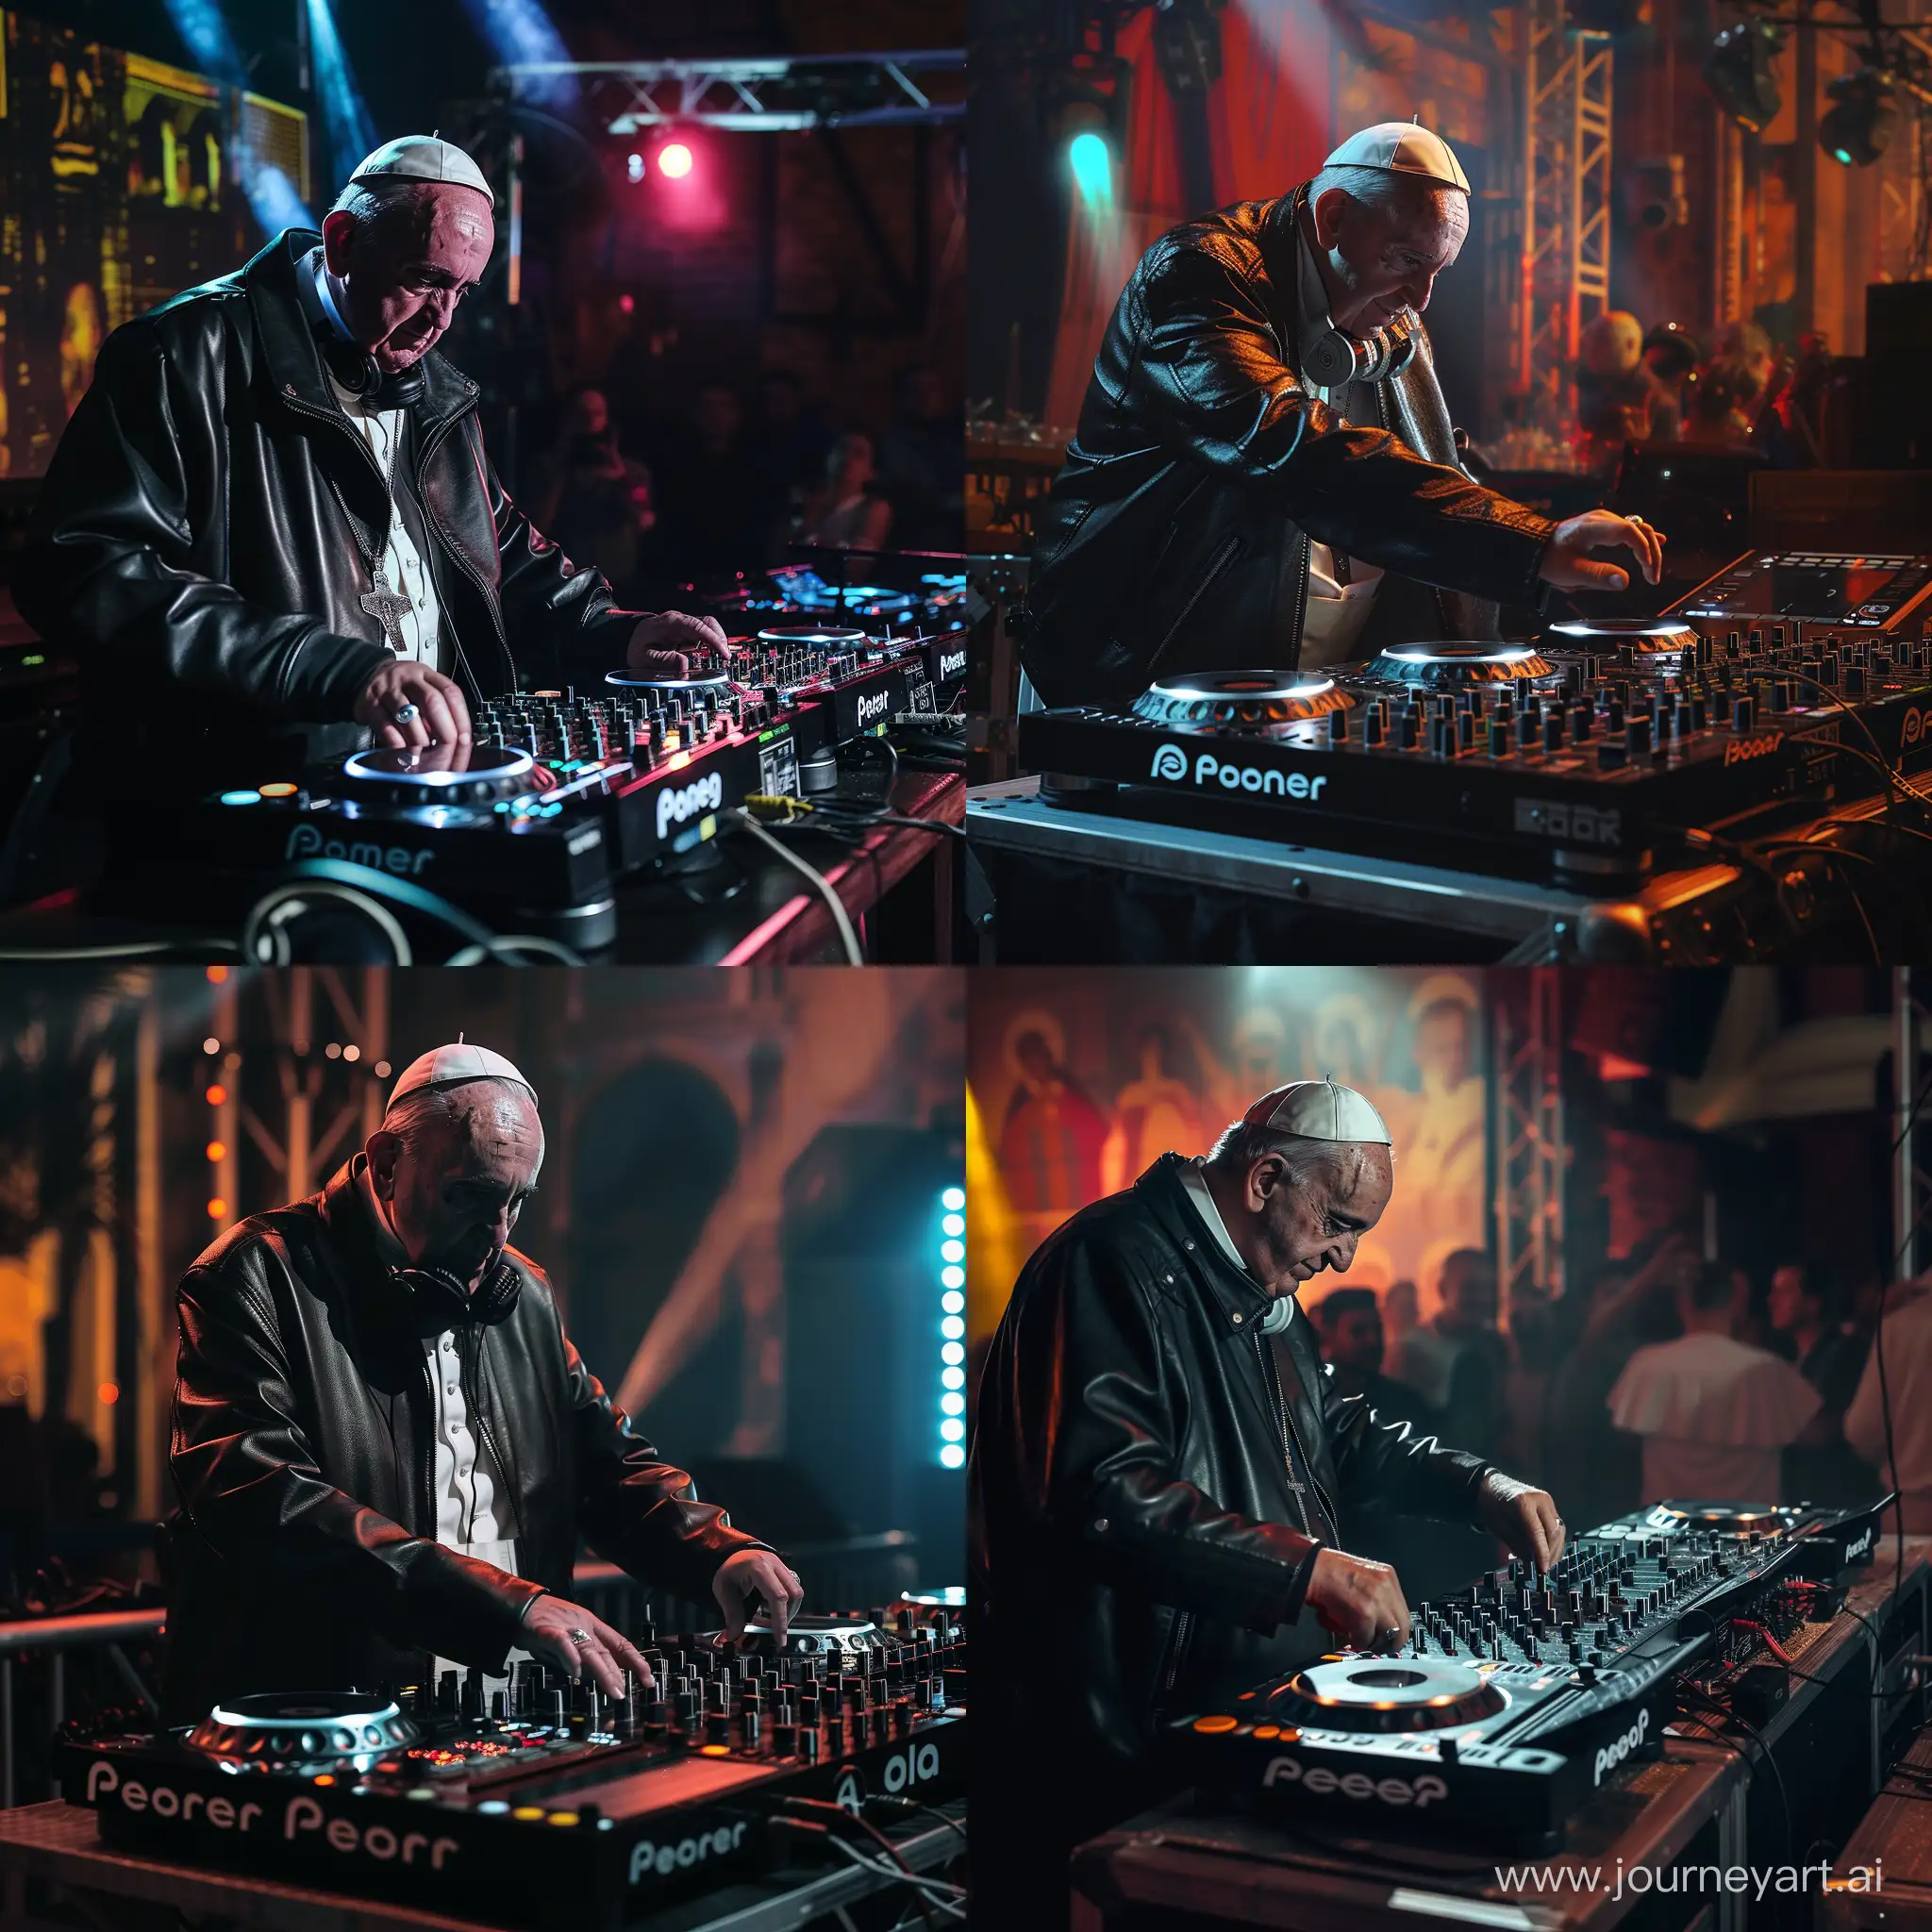  (Pope Francis) wearing leather jacket is a DJ in a nightclub, mixing live on stage, giant mixing table, 4k resolution, a masterpiece